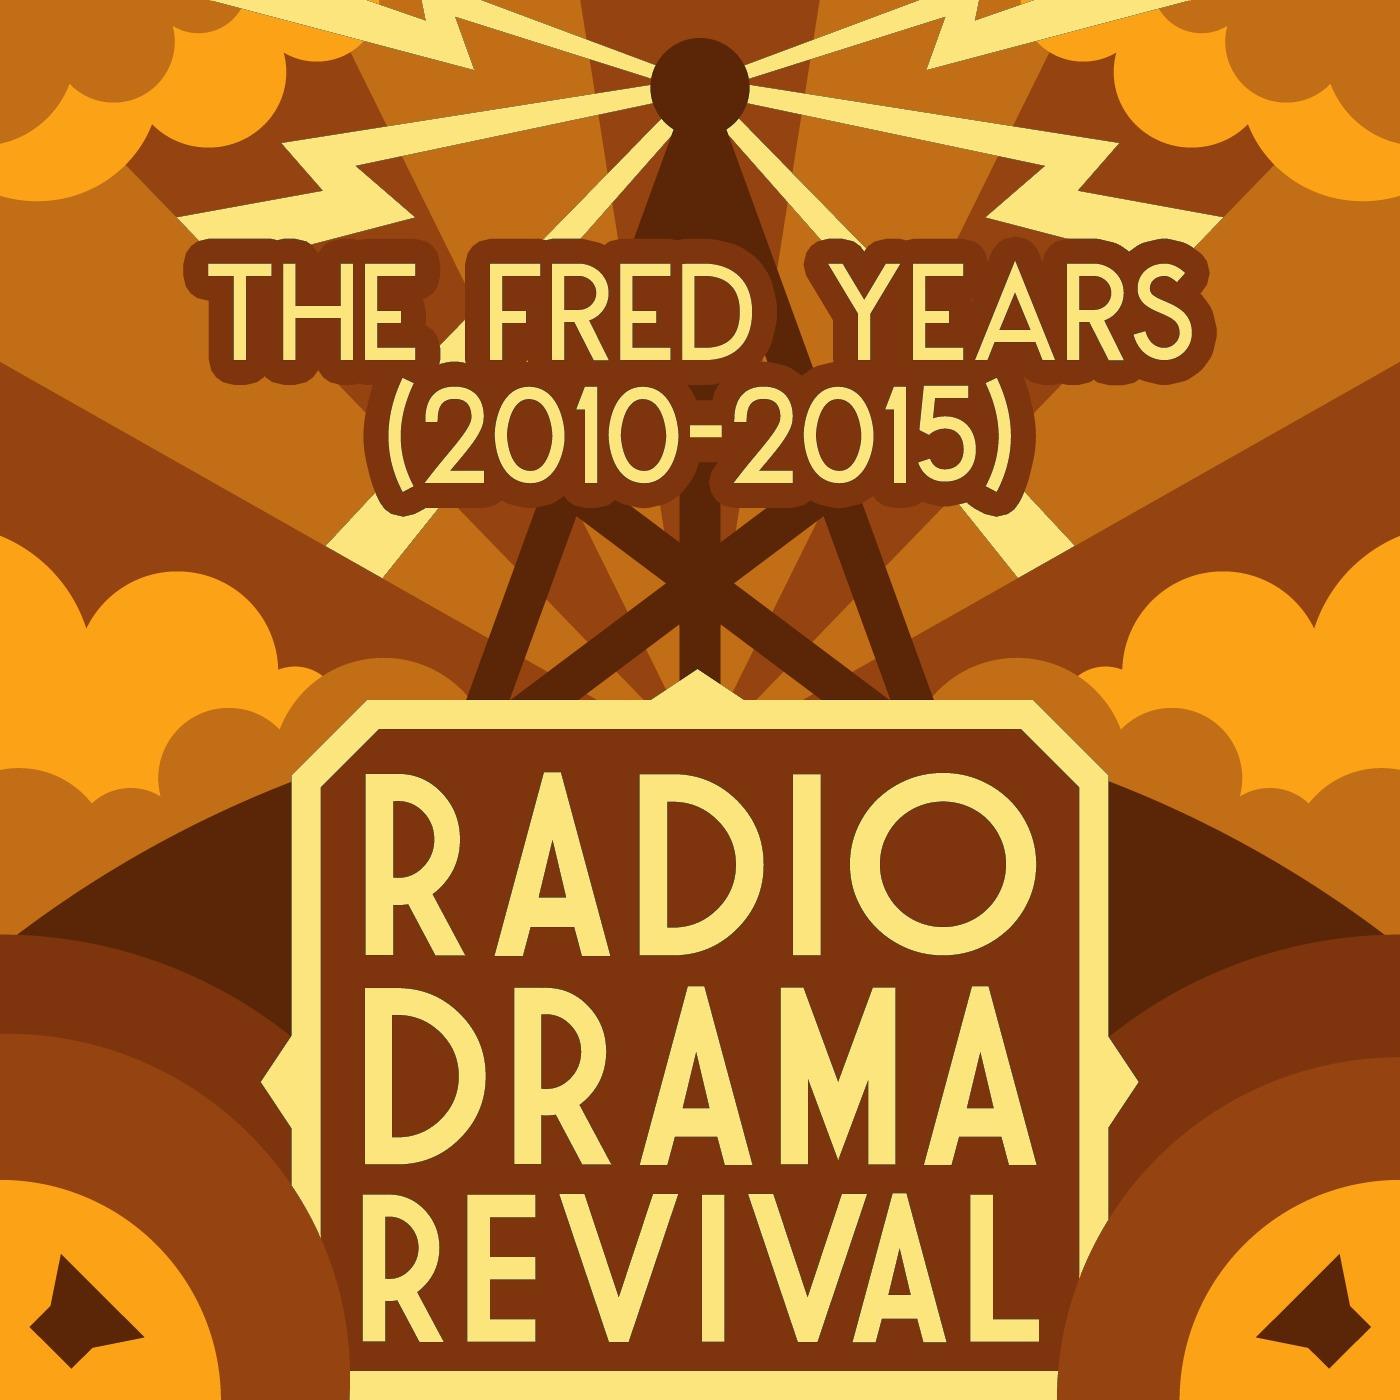 Radio Drama Revival: The Fred Years (2010-2015)